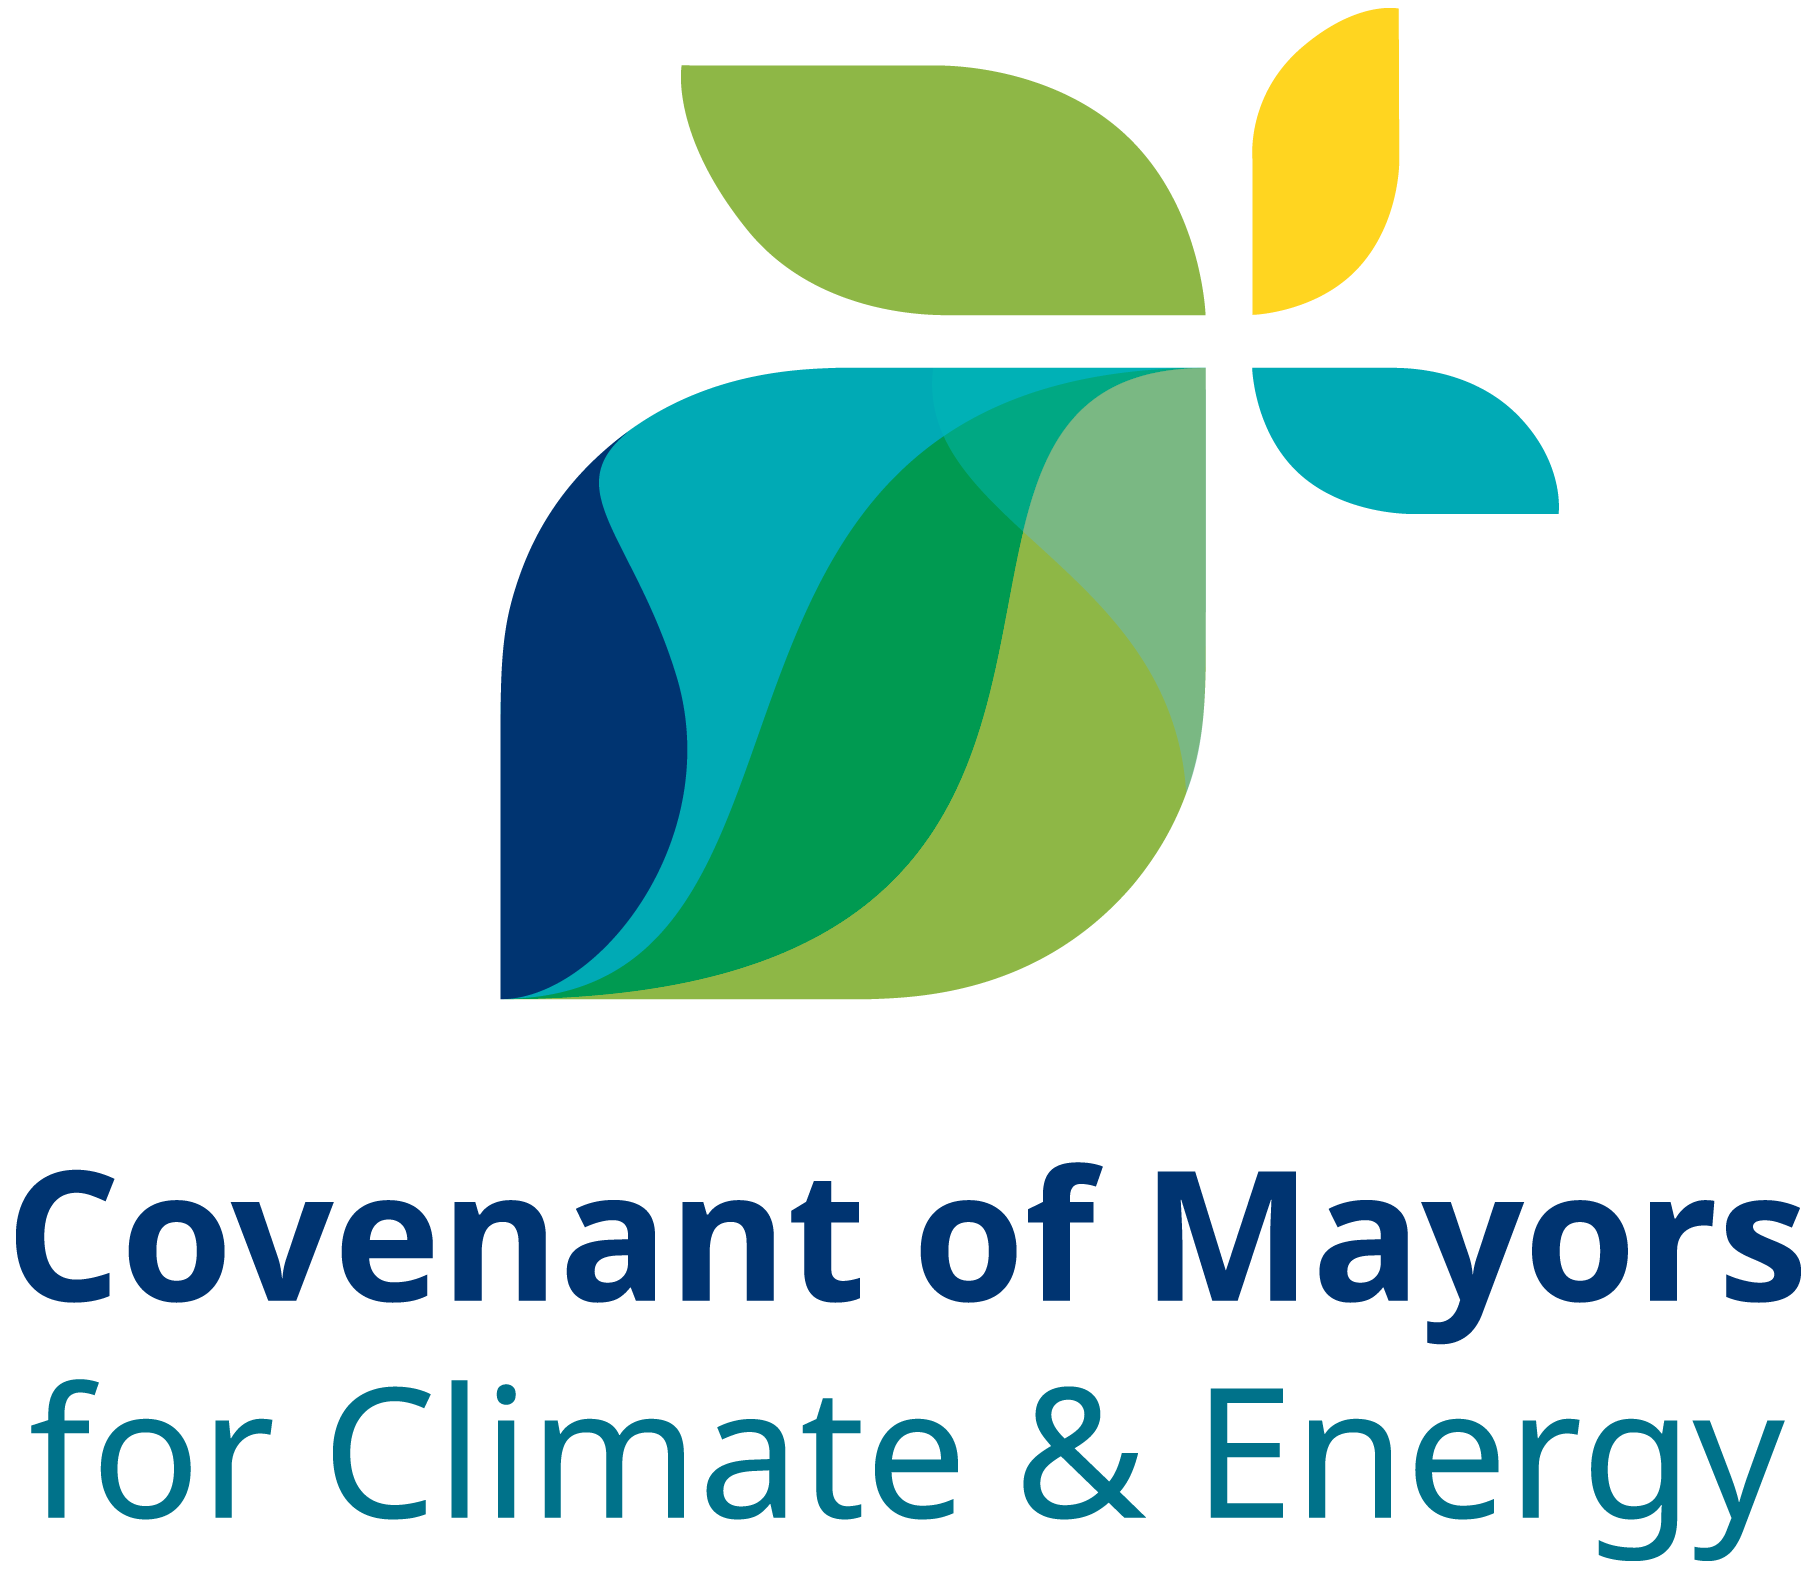 global covenant of mayors cities